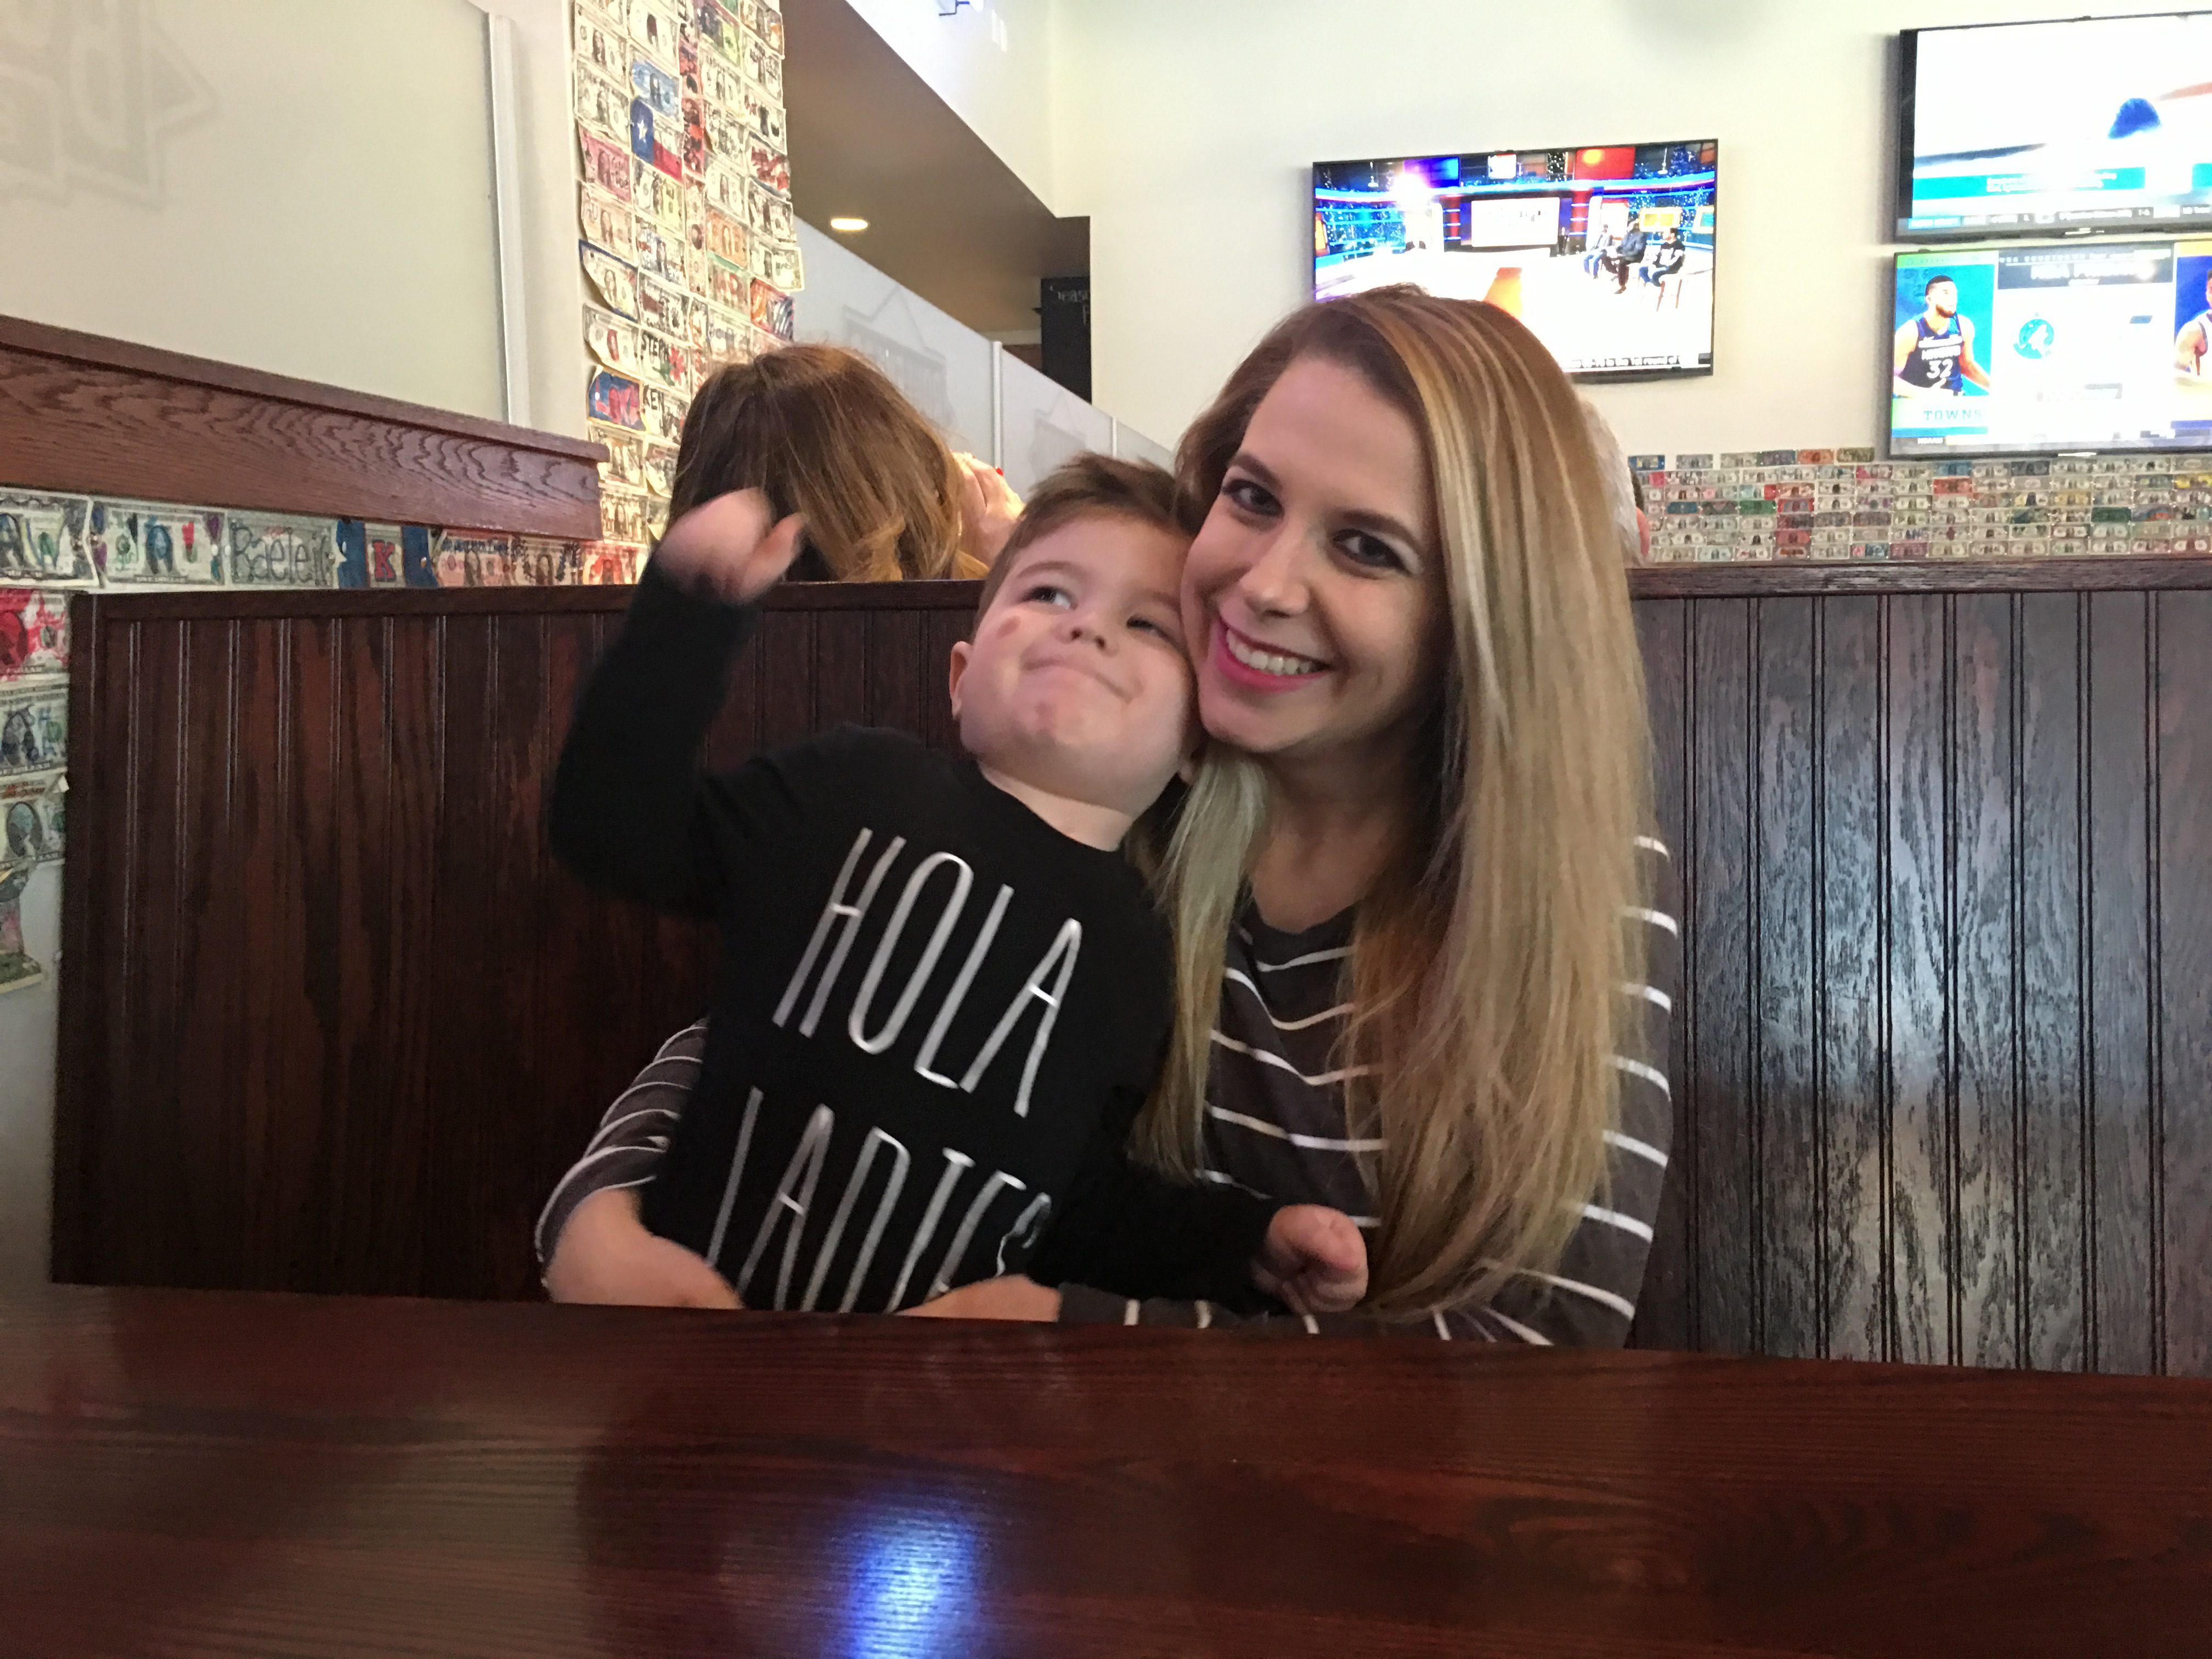 Day in the Life of a Stay-at-Home Mom of 2! Ever wondered what a SAHM does all day? How do moms of 2 schedule their day? How do you keep 2 kids busy all day? Here's a typical day in the life of a SAHM to 2!